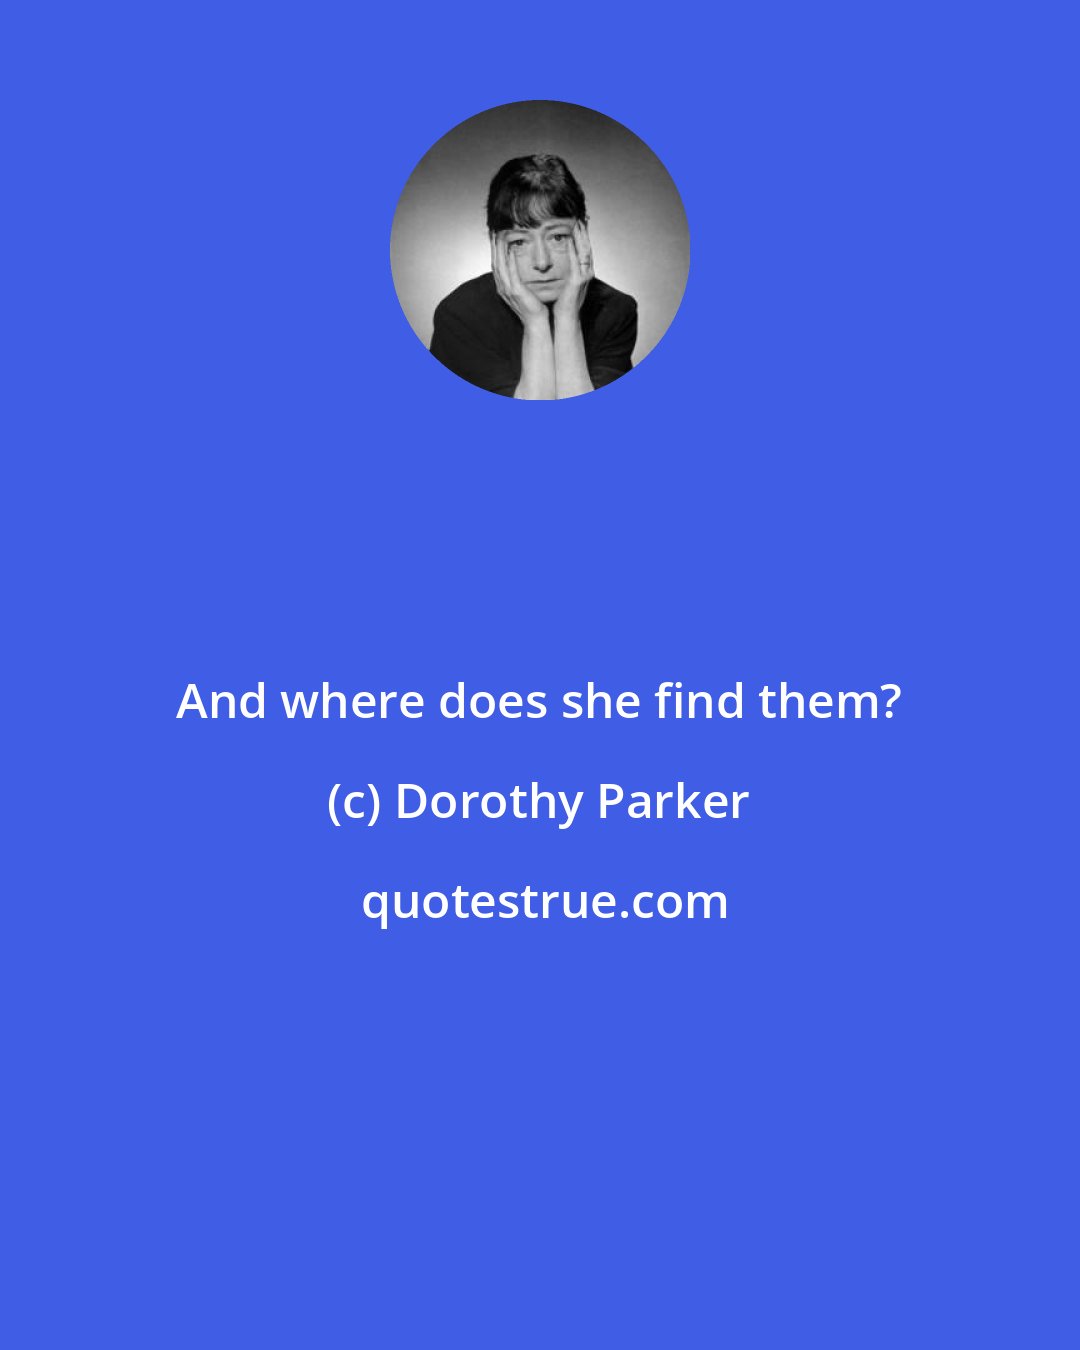 Dorothy Parker: And where does she find them?